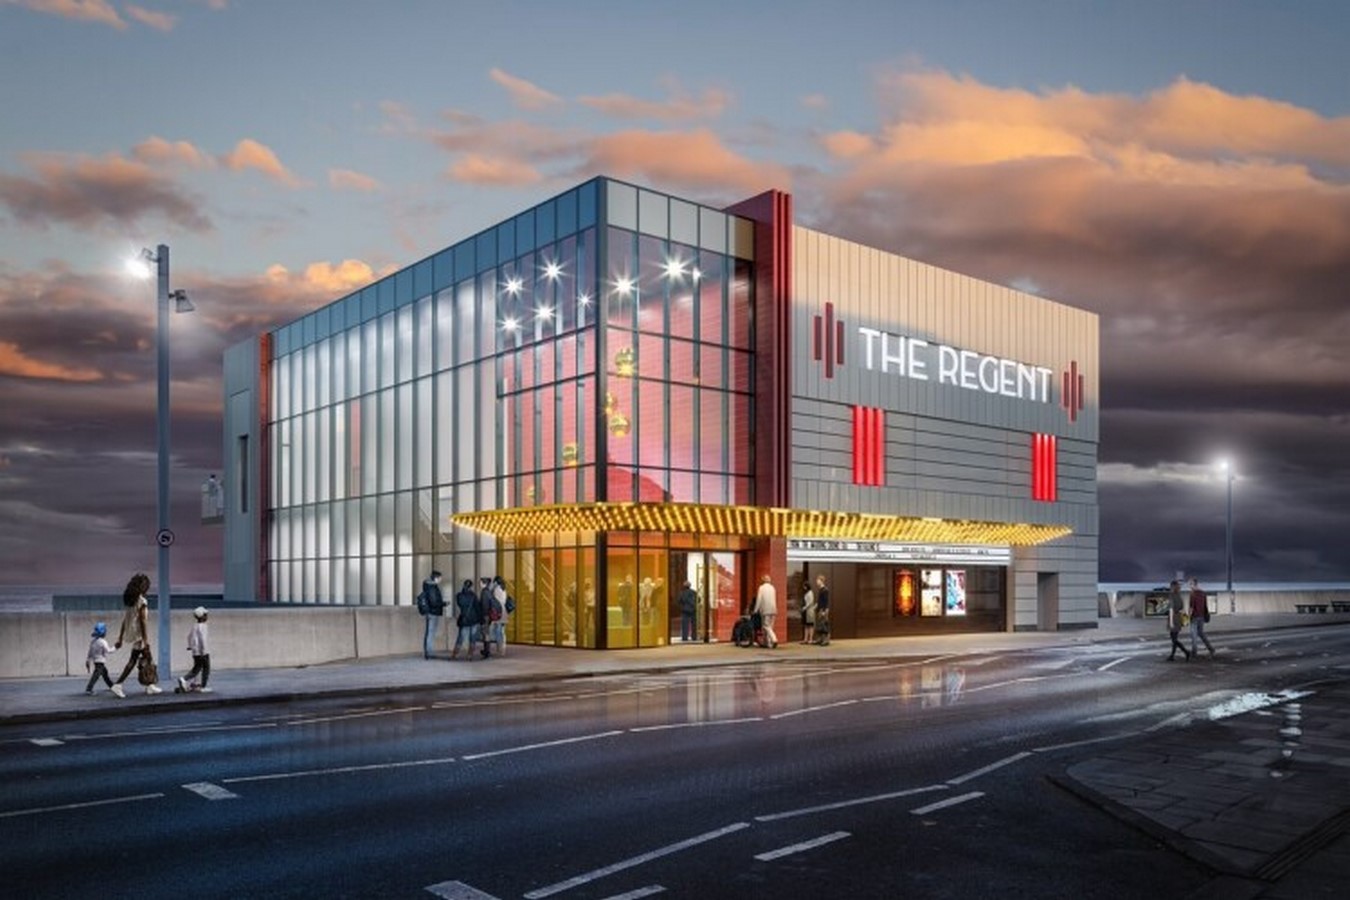 Redcar cinema redevelopment started by BAM - Sheet1